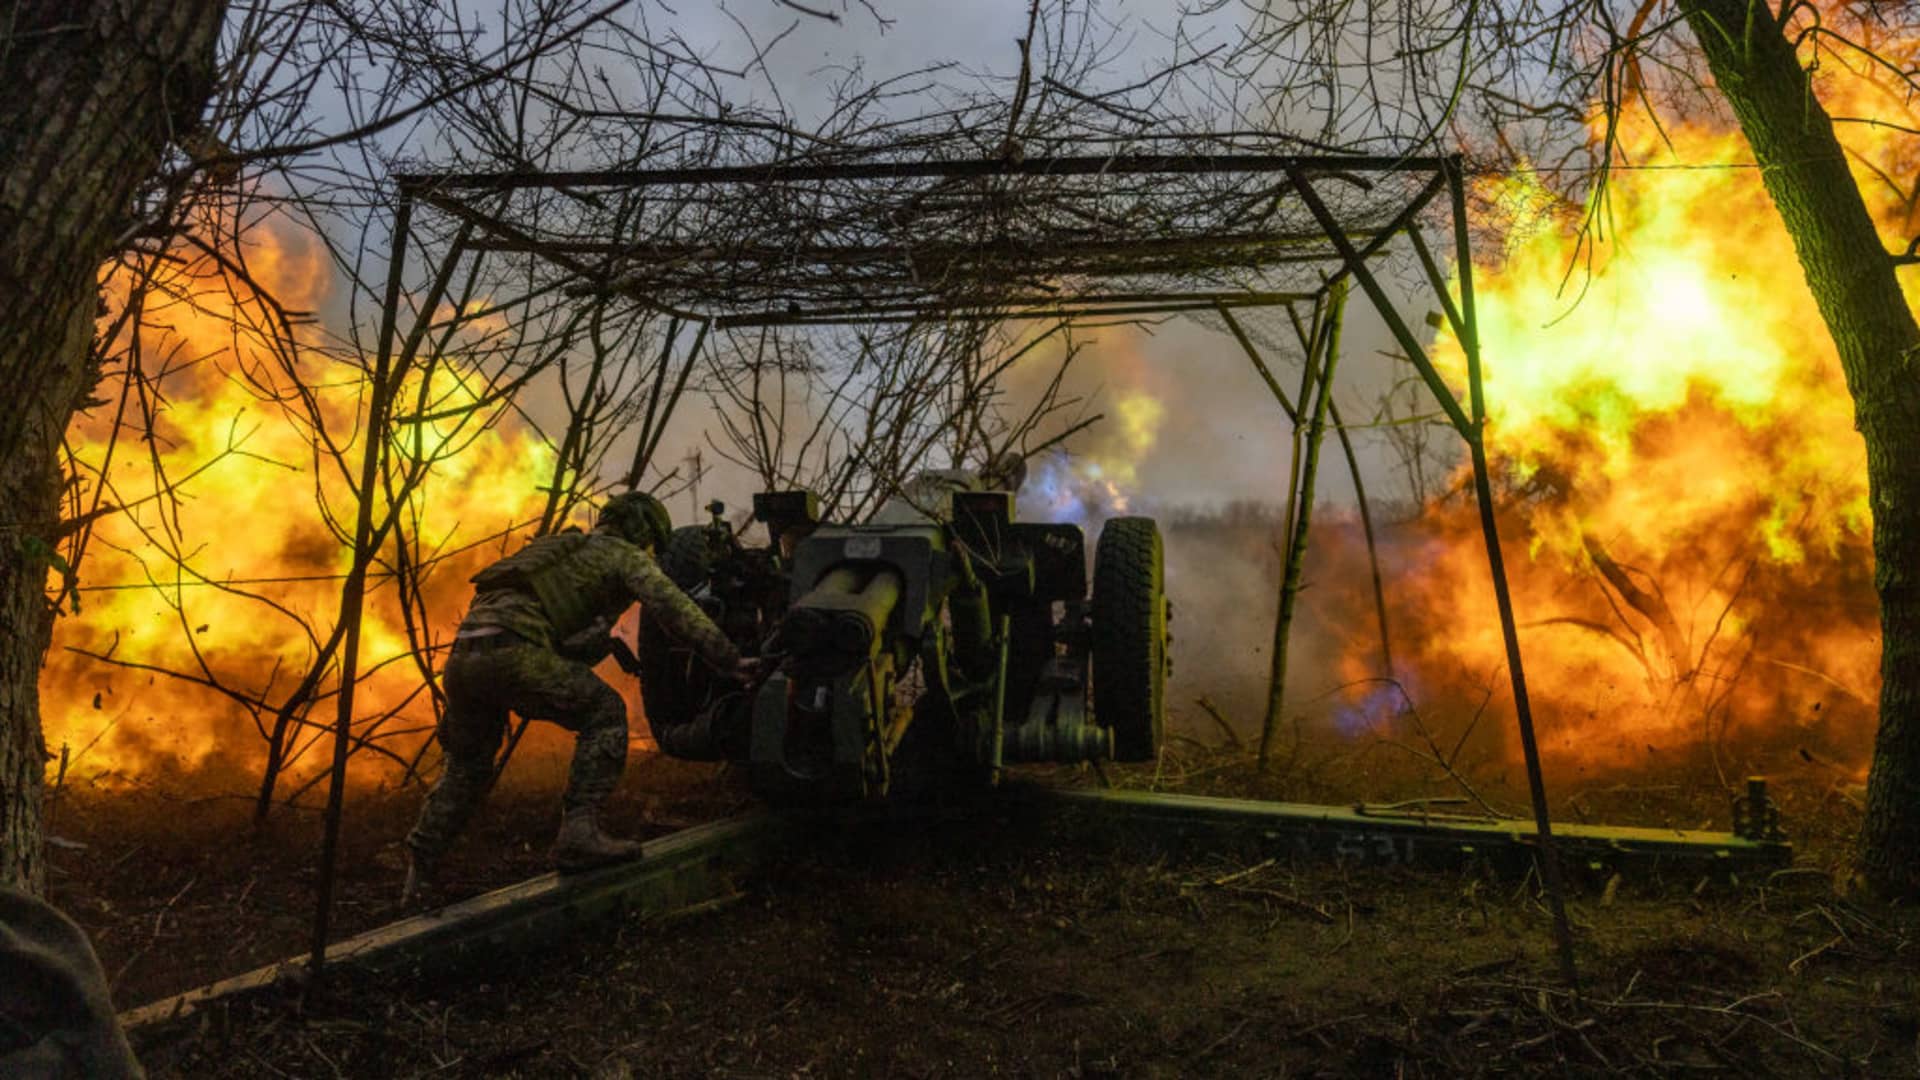 Ukrainian servicemen from the 10th Brigade brigade known as Edelwiess work along the frontline outside of Soledar, Ukraine on March 11, 2023